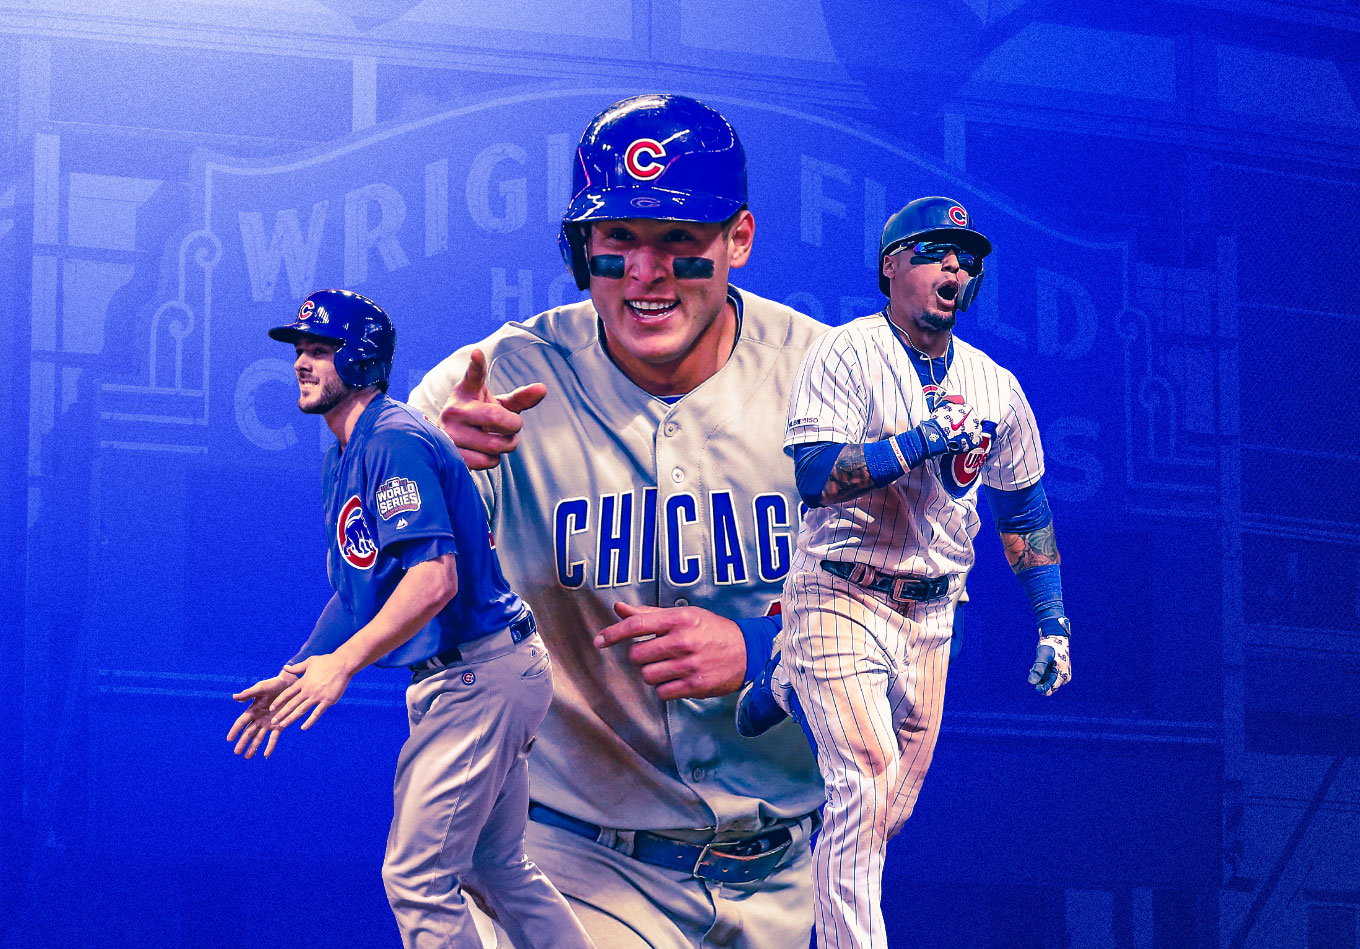 Decision 2021: How Should the Cubs Handle Their Big Three?